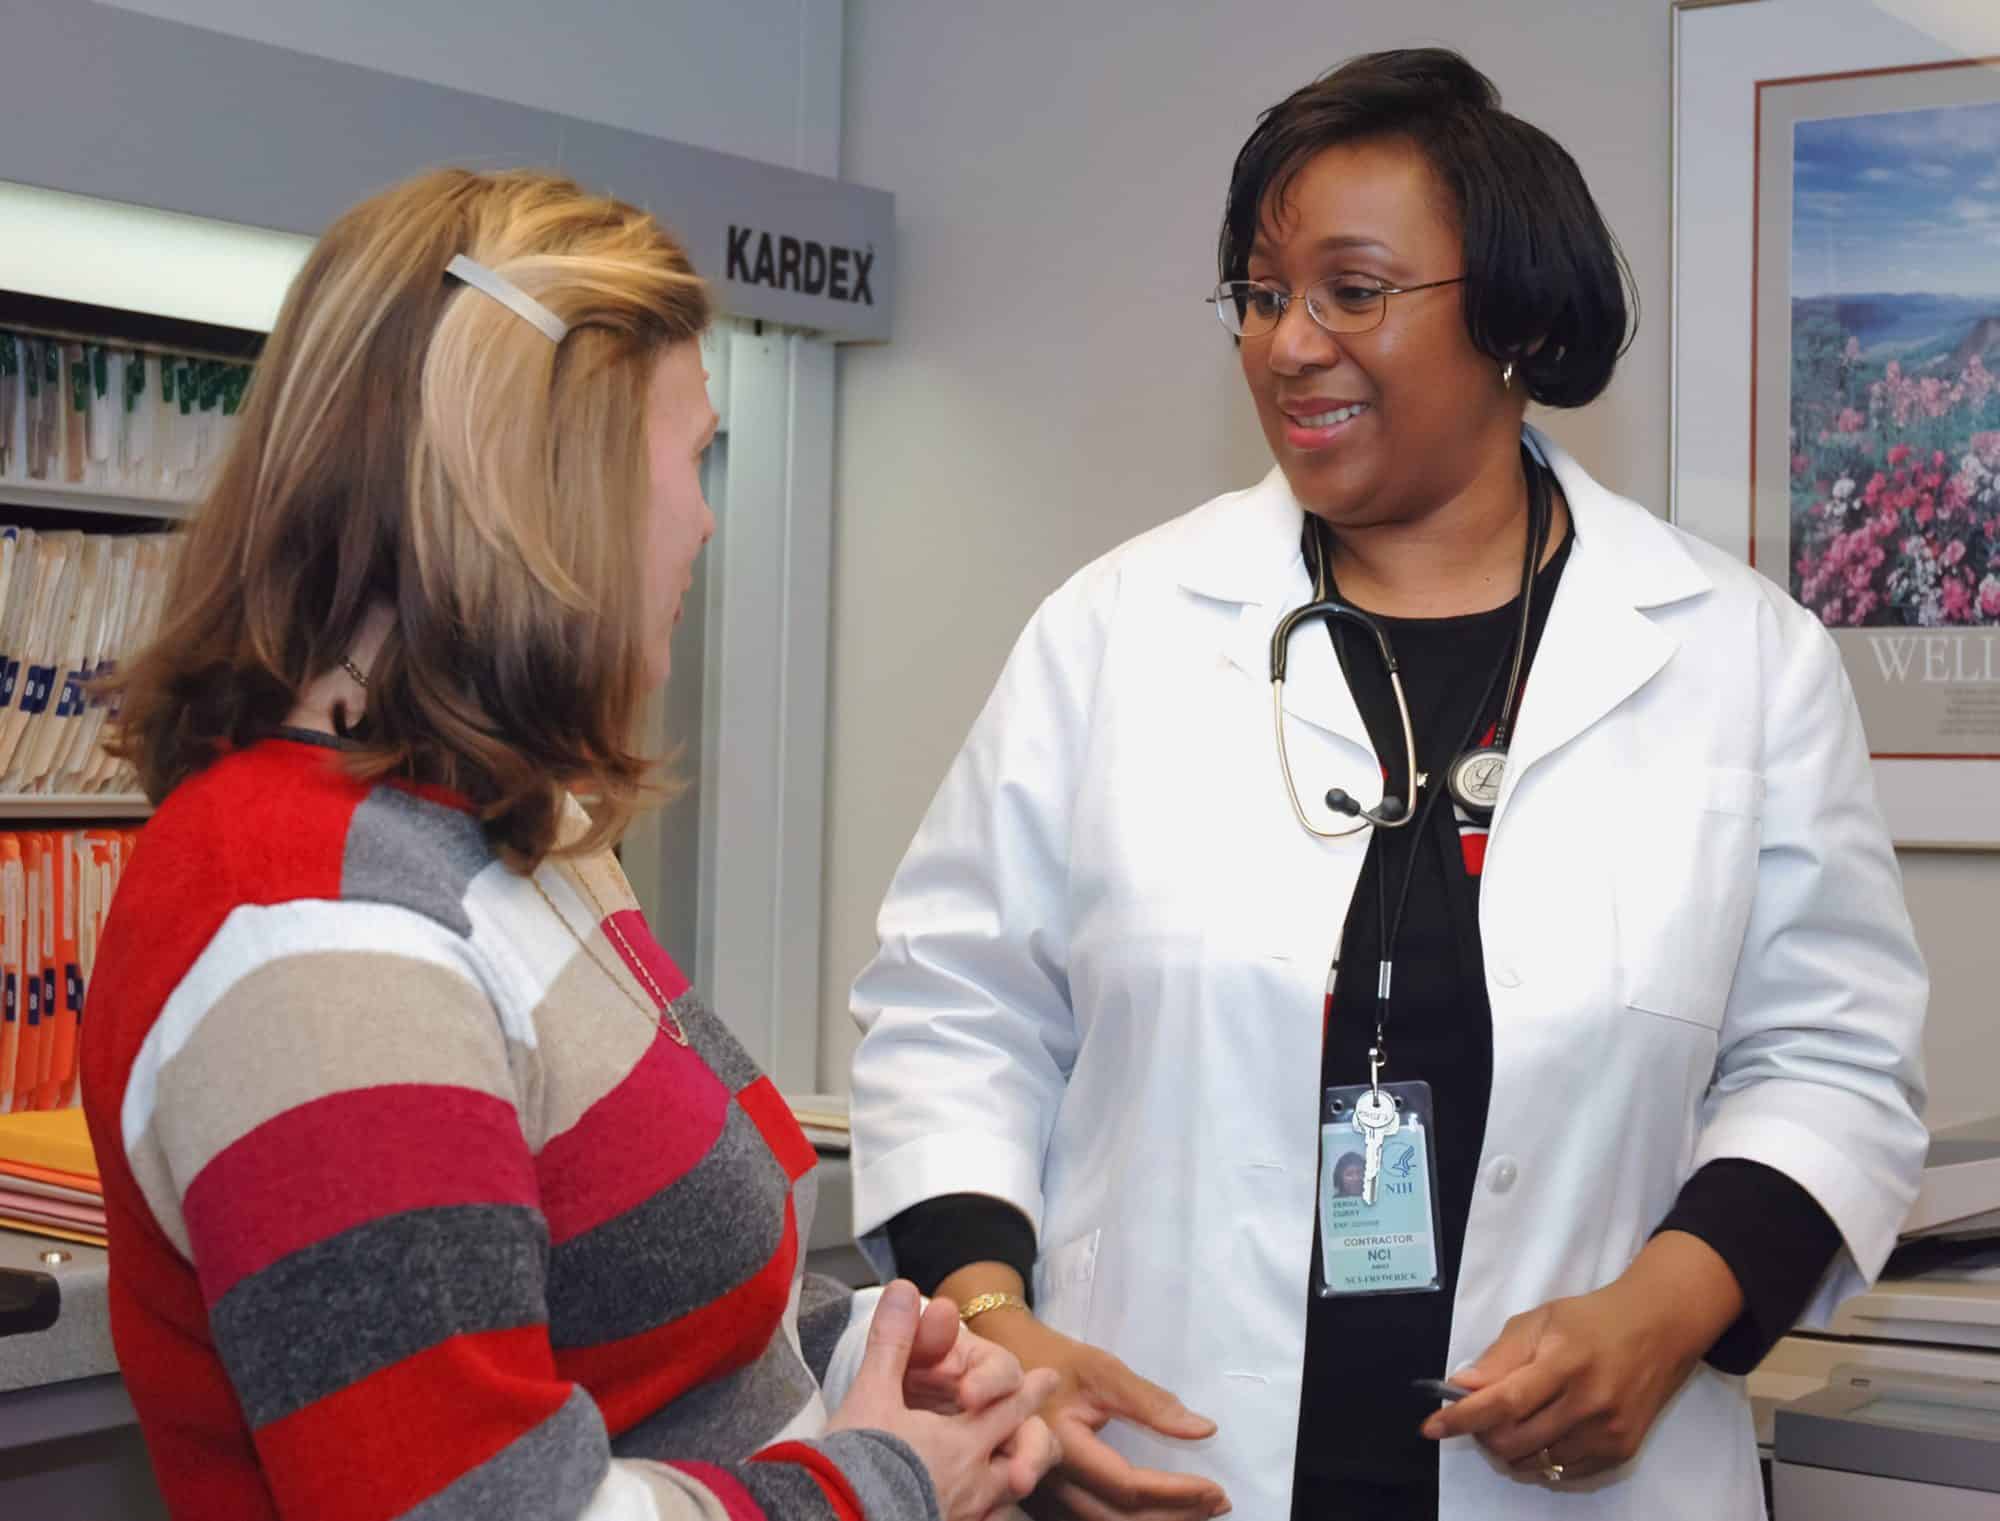 A black female doctor talks to her white female patient